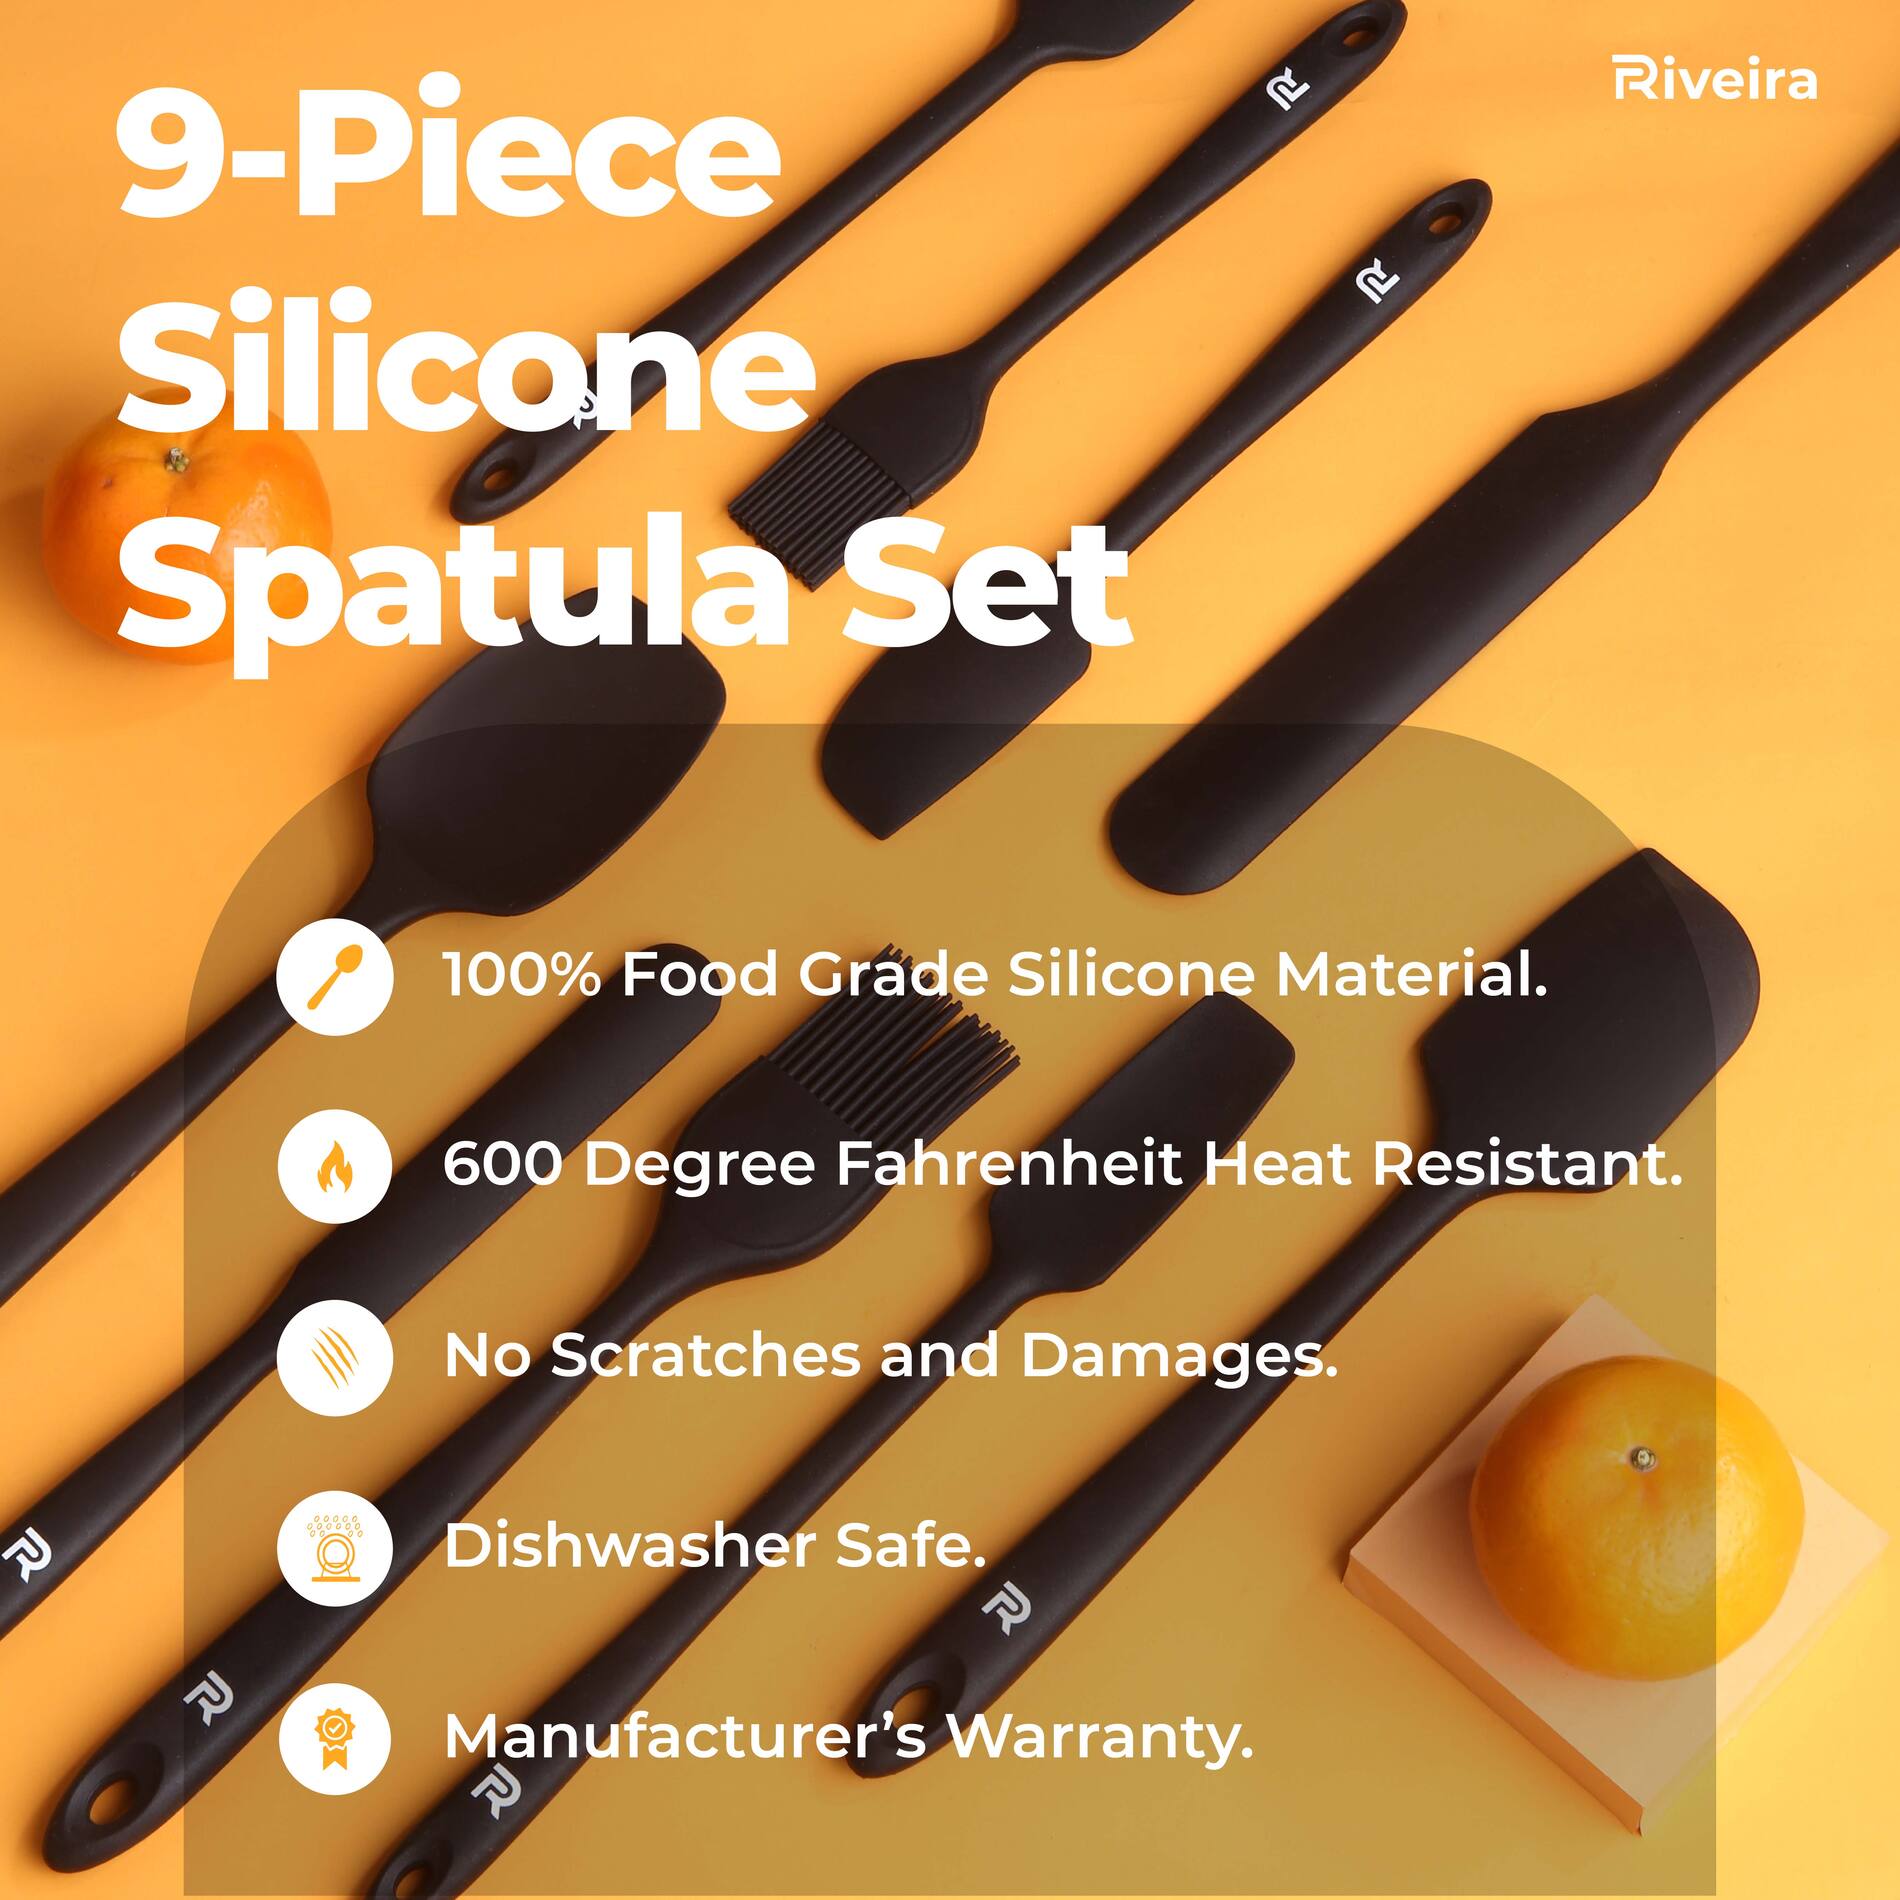 Riveira Silicone Spatula Set 9-Piece 600°F+ Heat Resistant kitchen utensils set Cooking Utensils Set Plastic Rubber Spatulas for Nonstick Cookware Baking Spoon Sets for Kitchen in Black